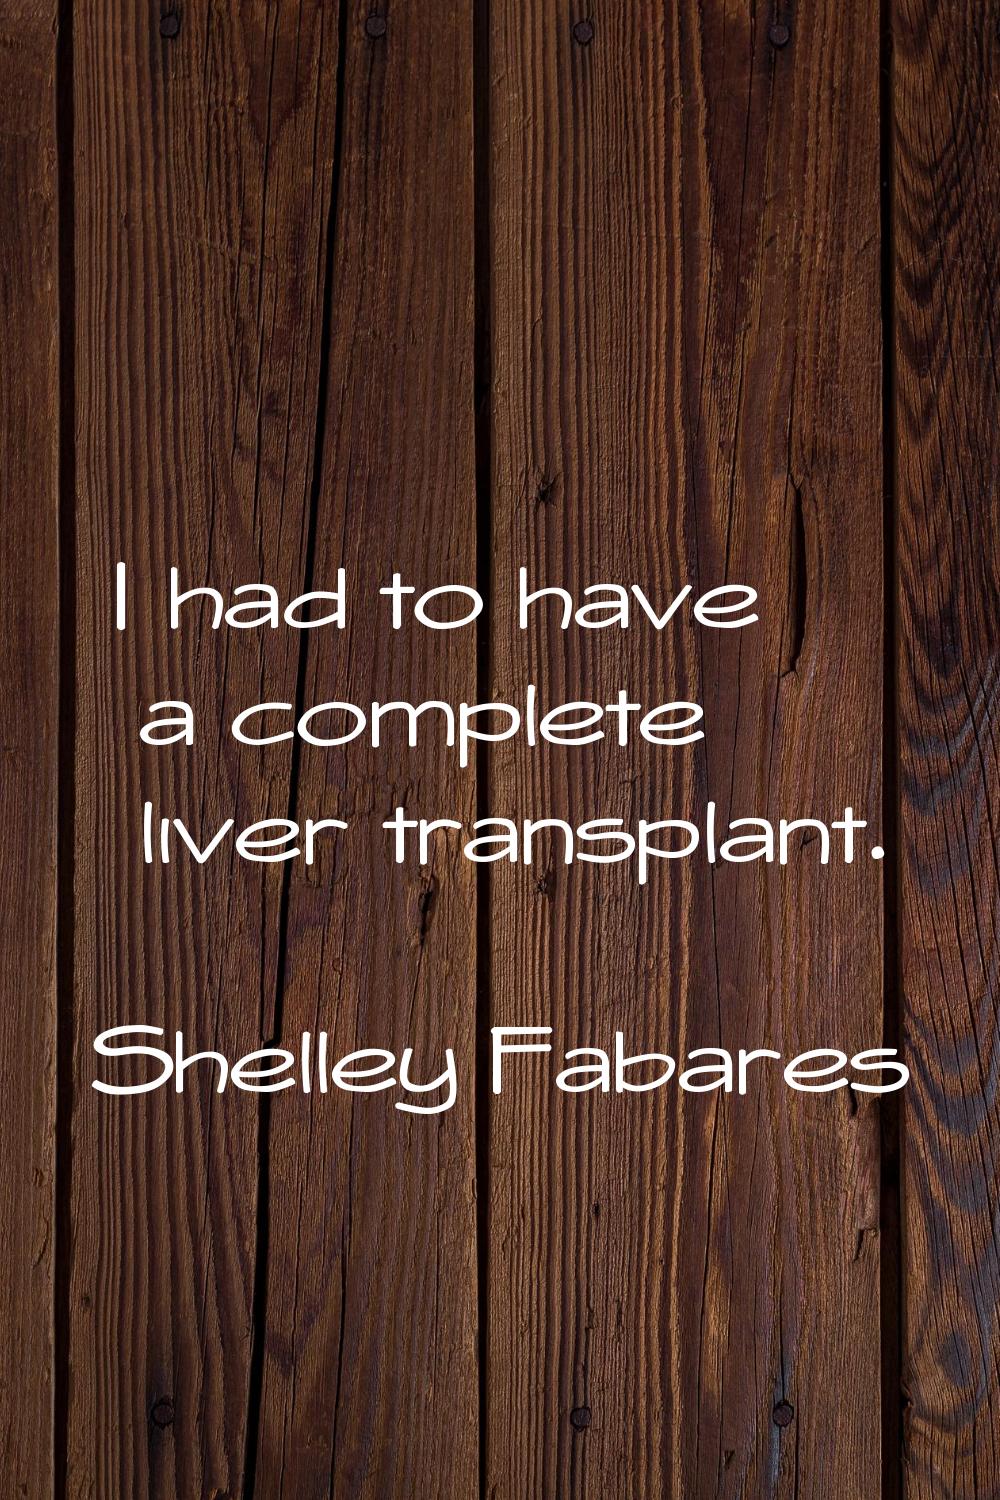 I had to have a complete liver transplant.